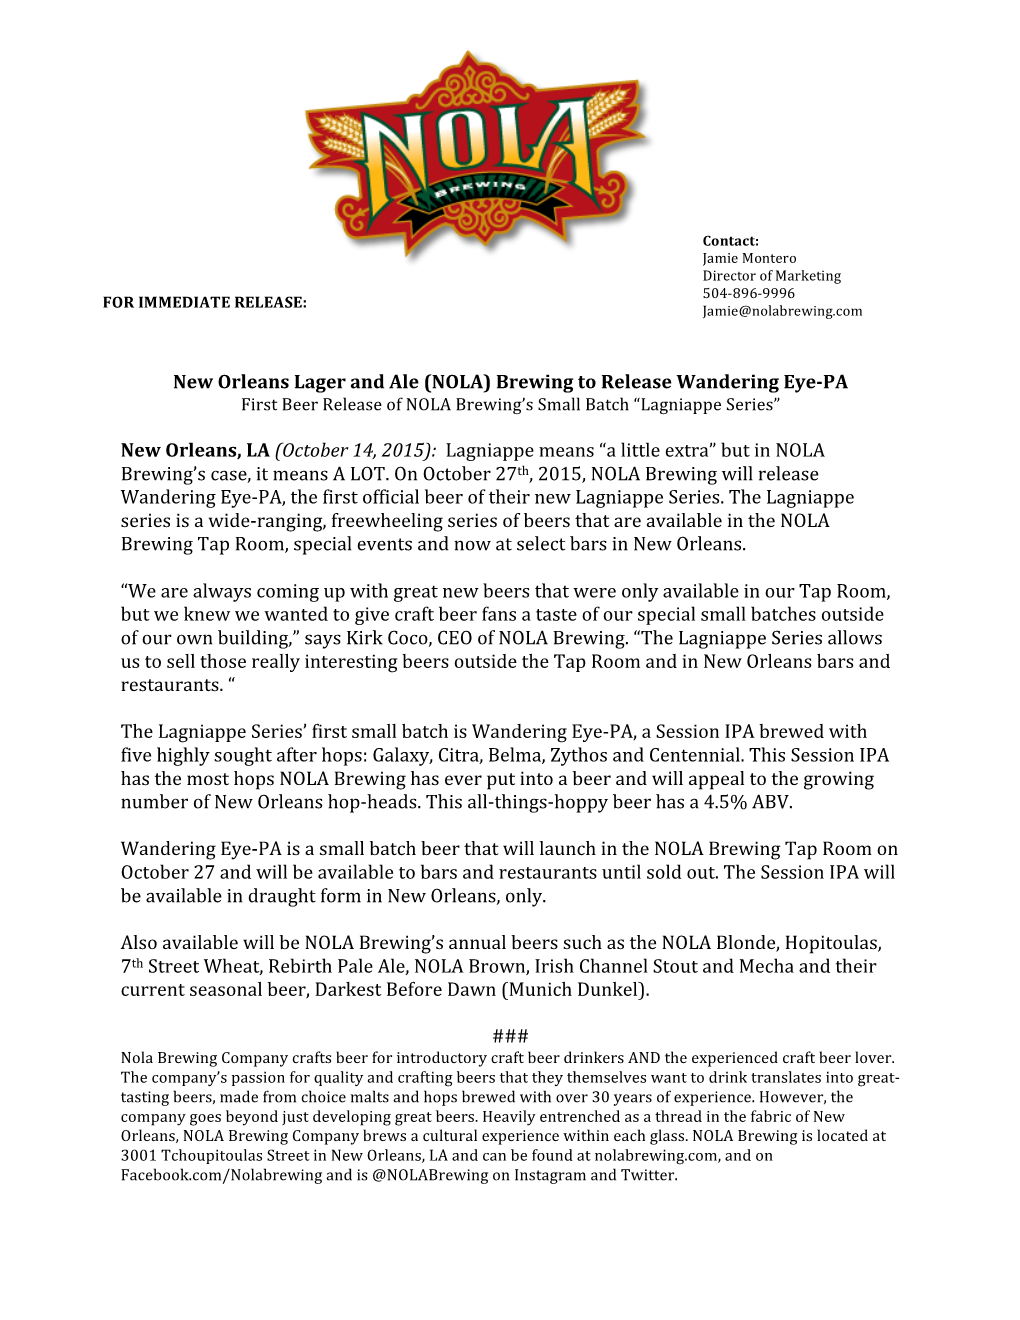 Brewing to Release Wandering Eye-PA First Beer Release of NOLA Brewing’S Small Batch “Lagniappe Series”